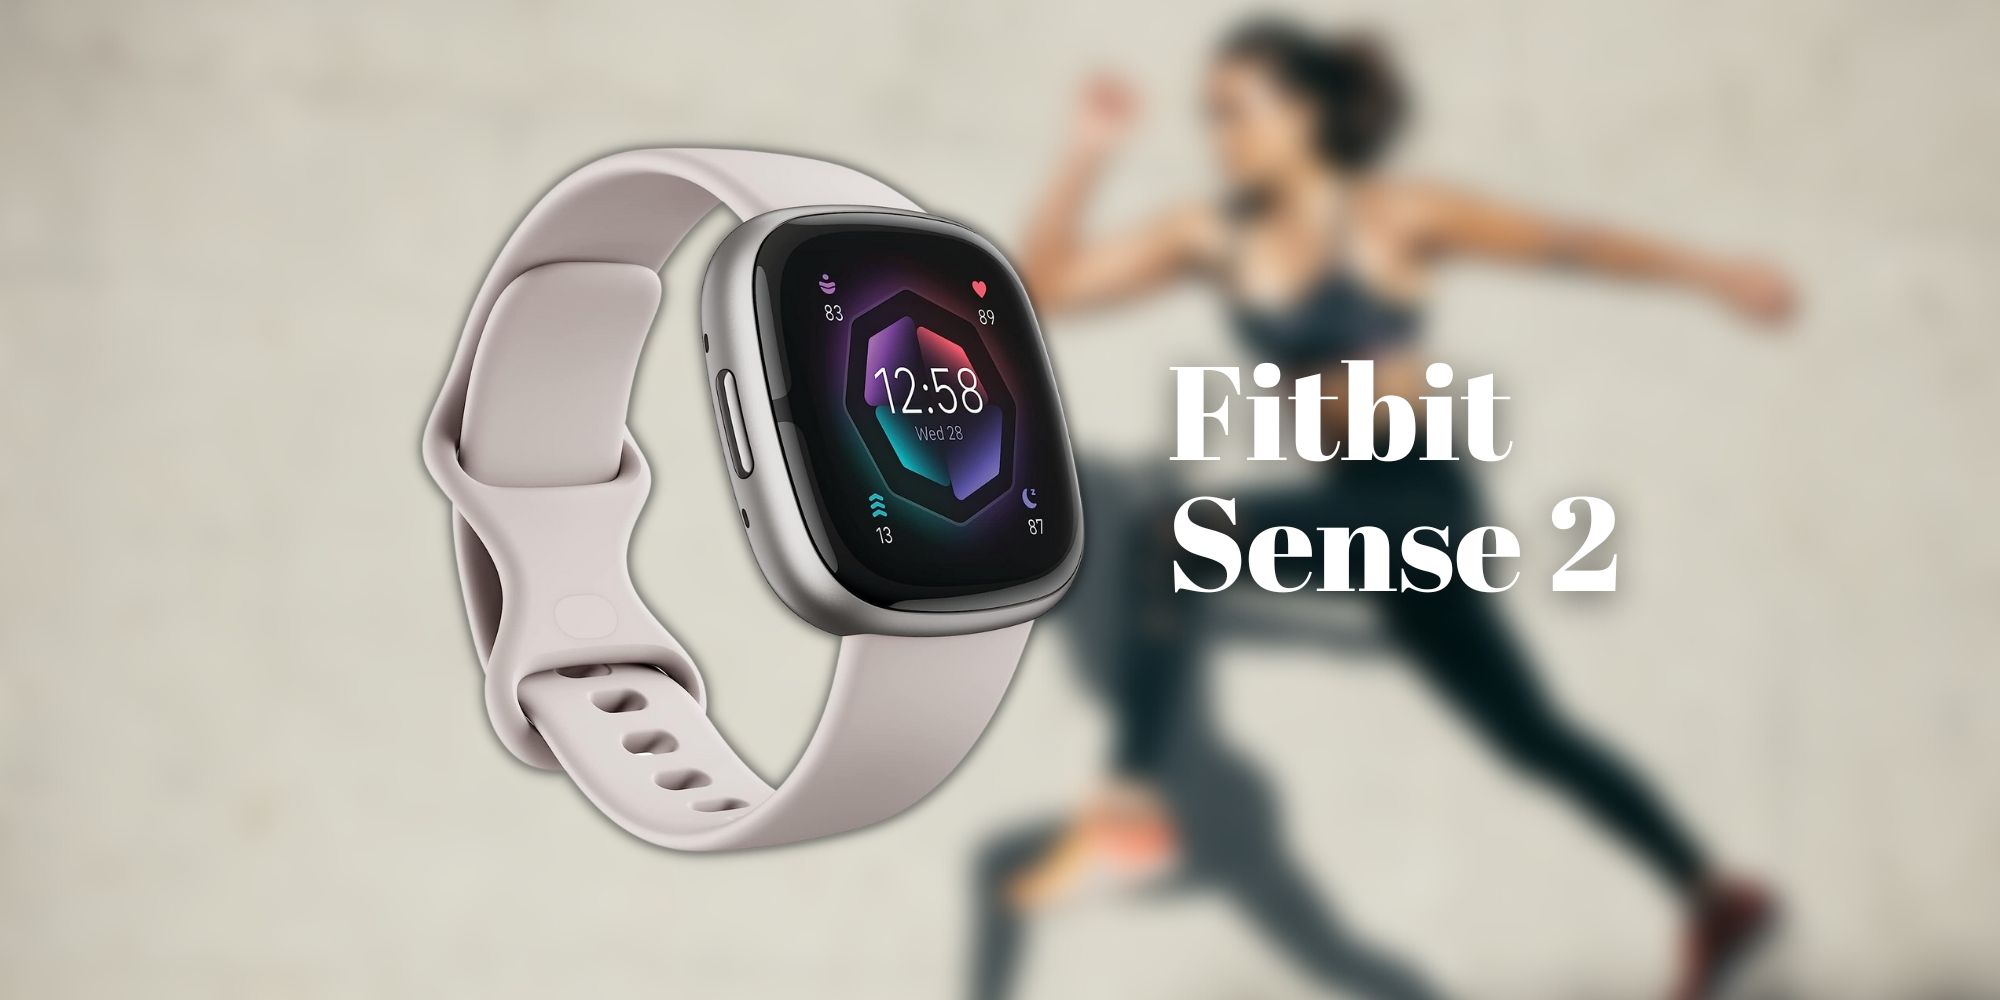 Image of the Fitbit Sense 2 fitness tracker